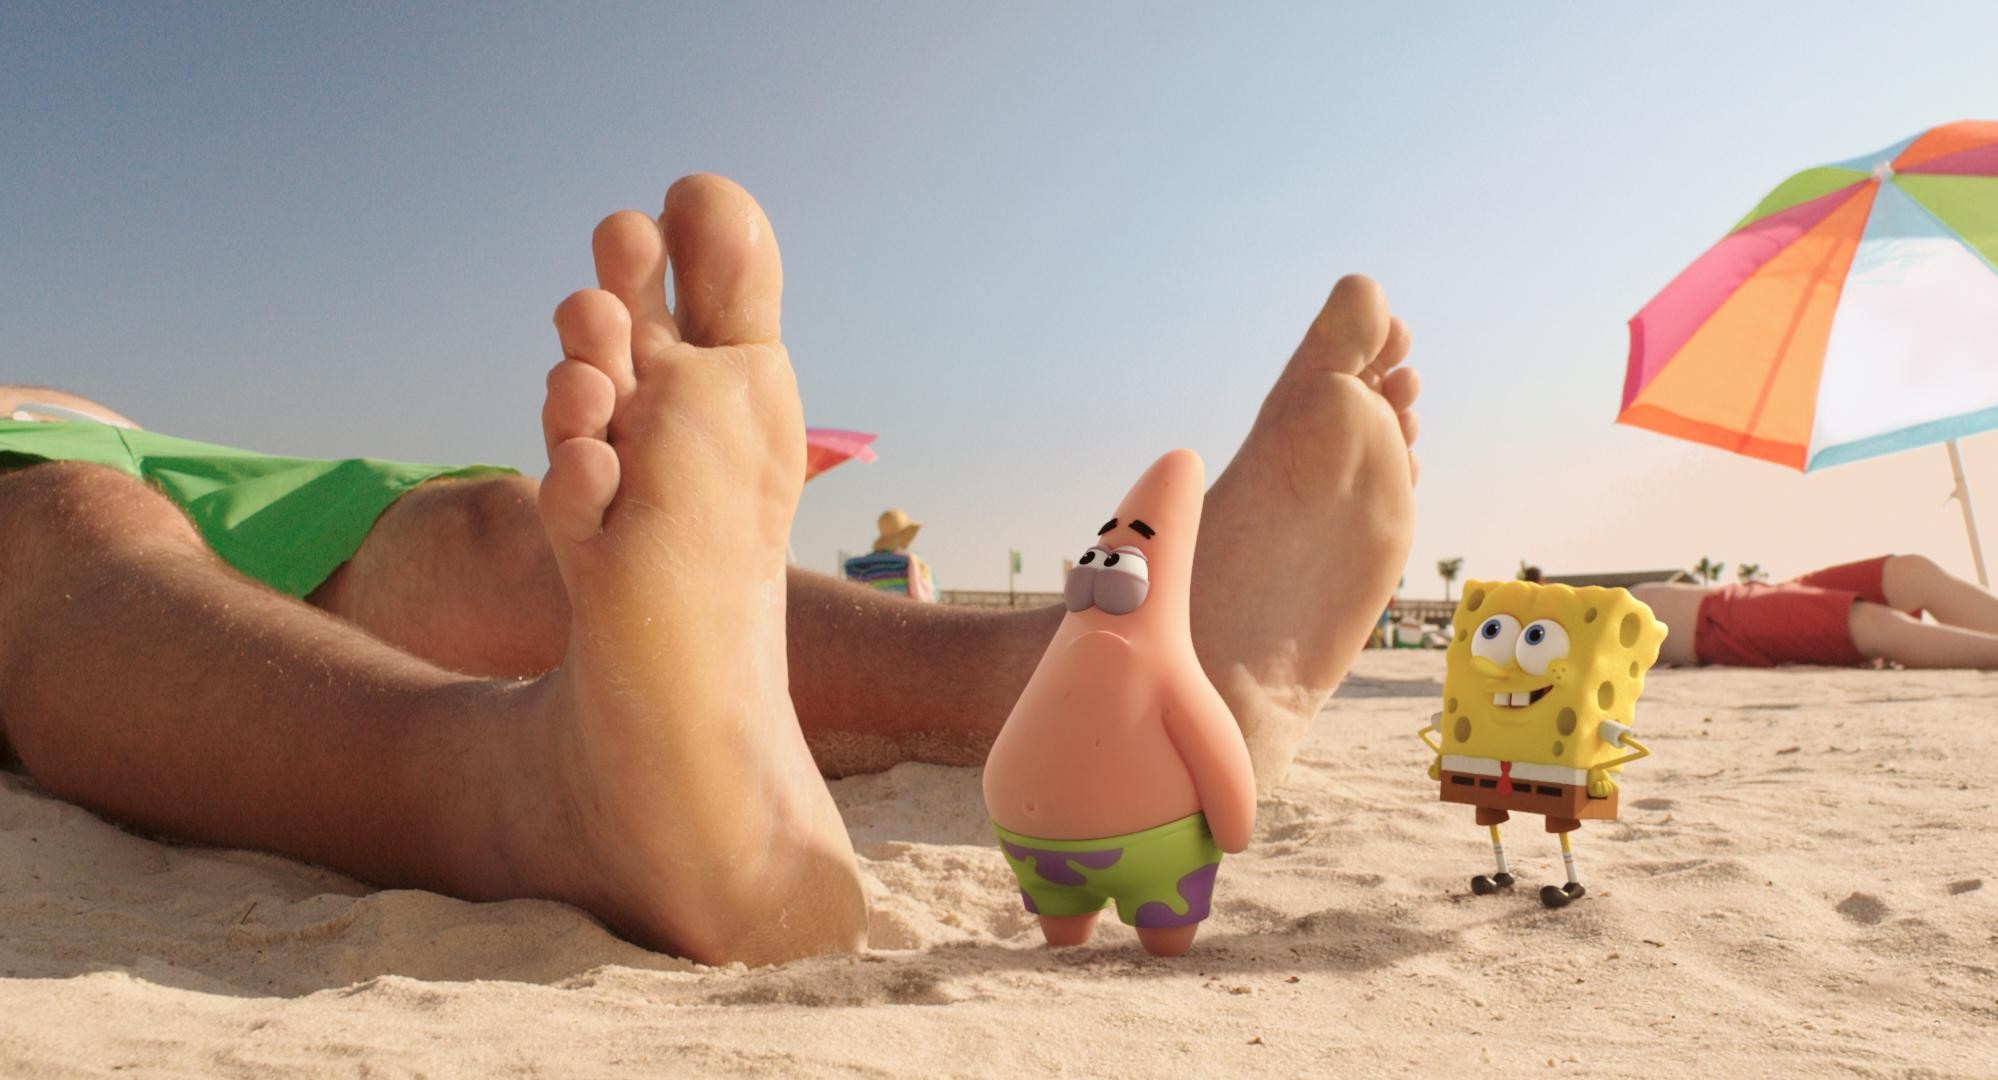 Patrick Star and SpongeBob SquarePants in Paramount Pictures' The SpongeBob Movie: Sponge Out of Water (2015)